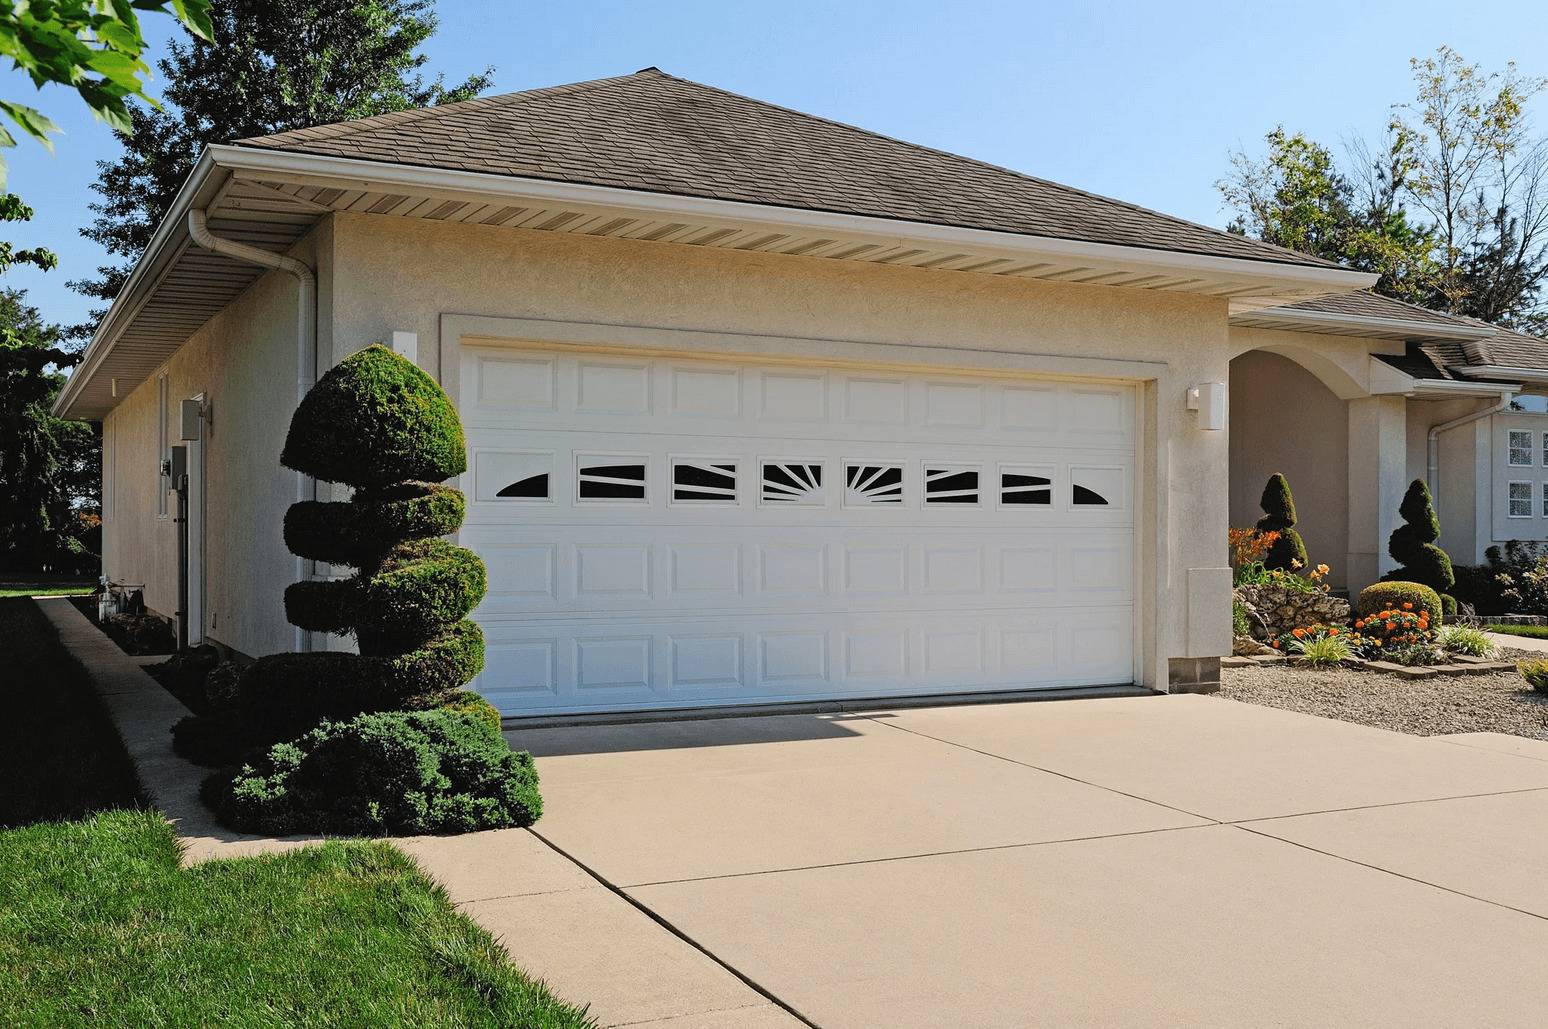 Add depth to your garage door with C.H.I.’s raised panel design, available in both short and long panel options.